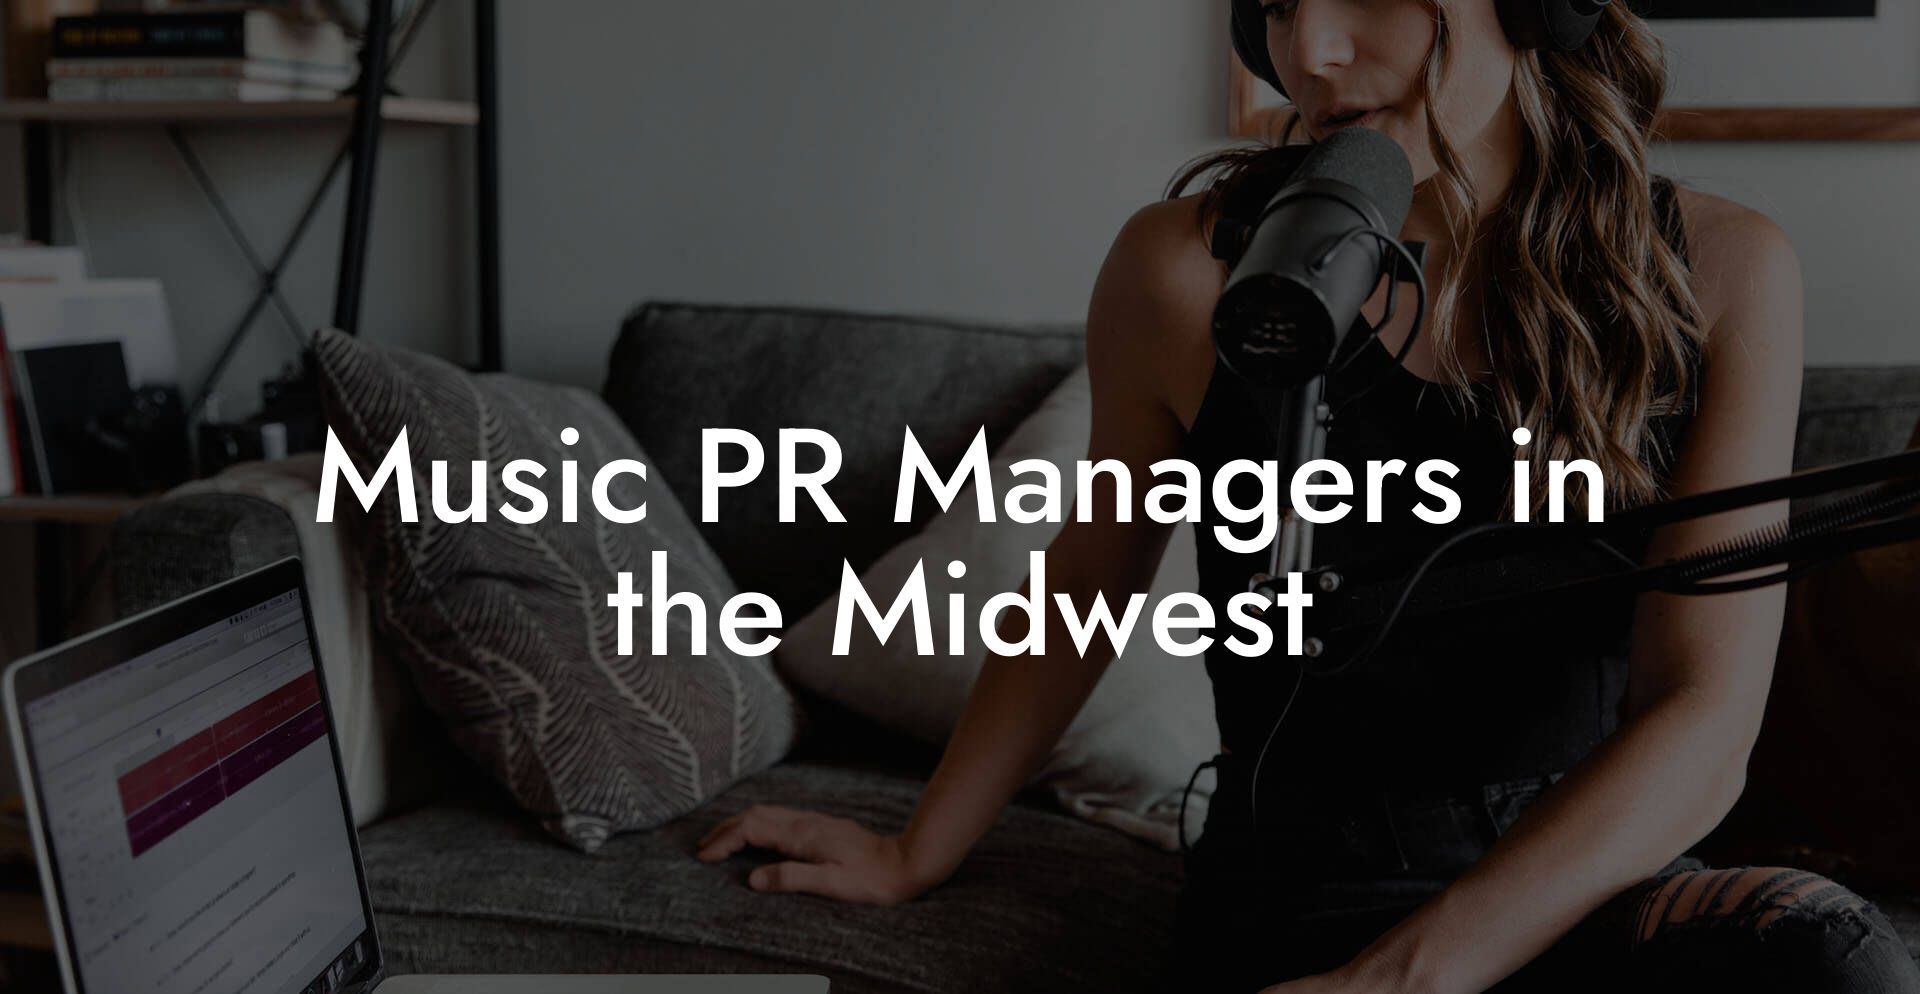 Music PR Managers in the Midwest